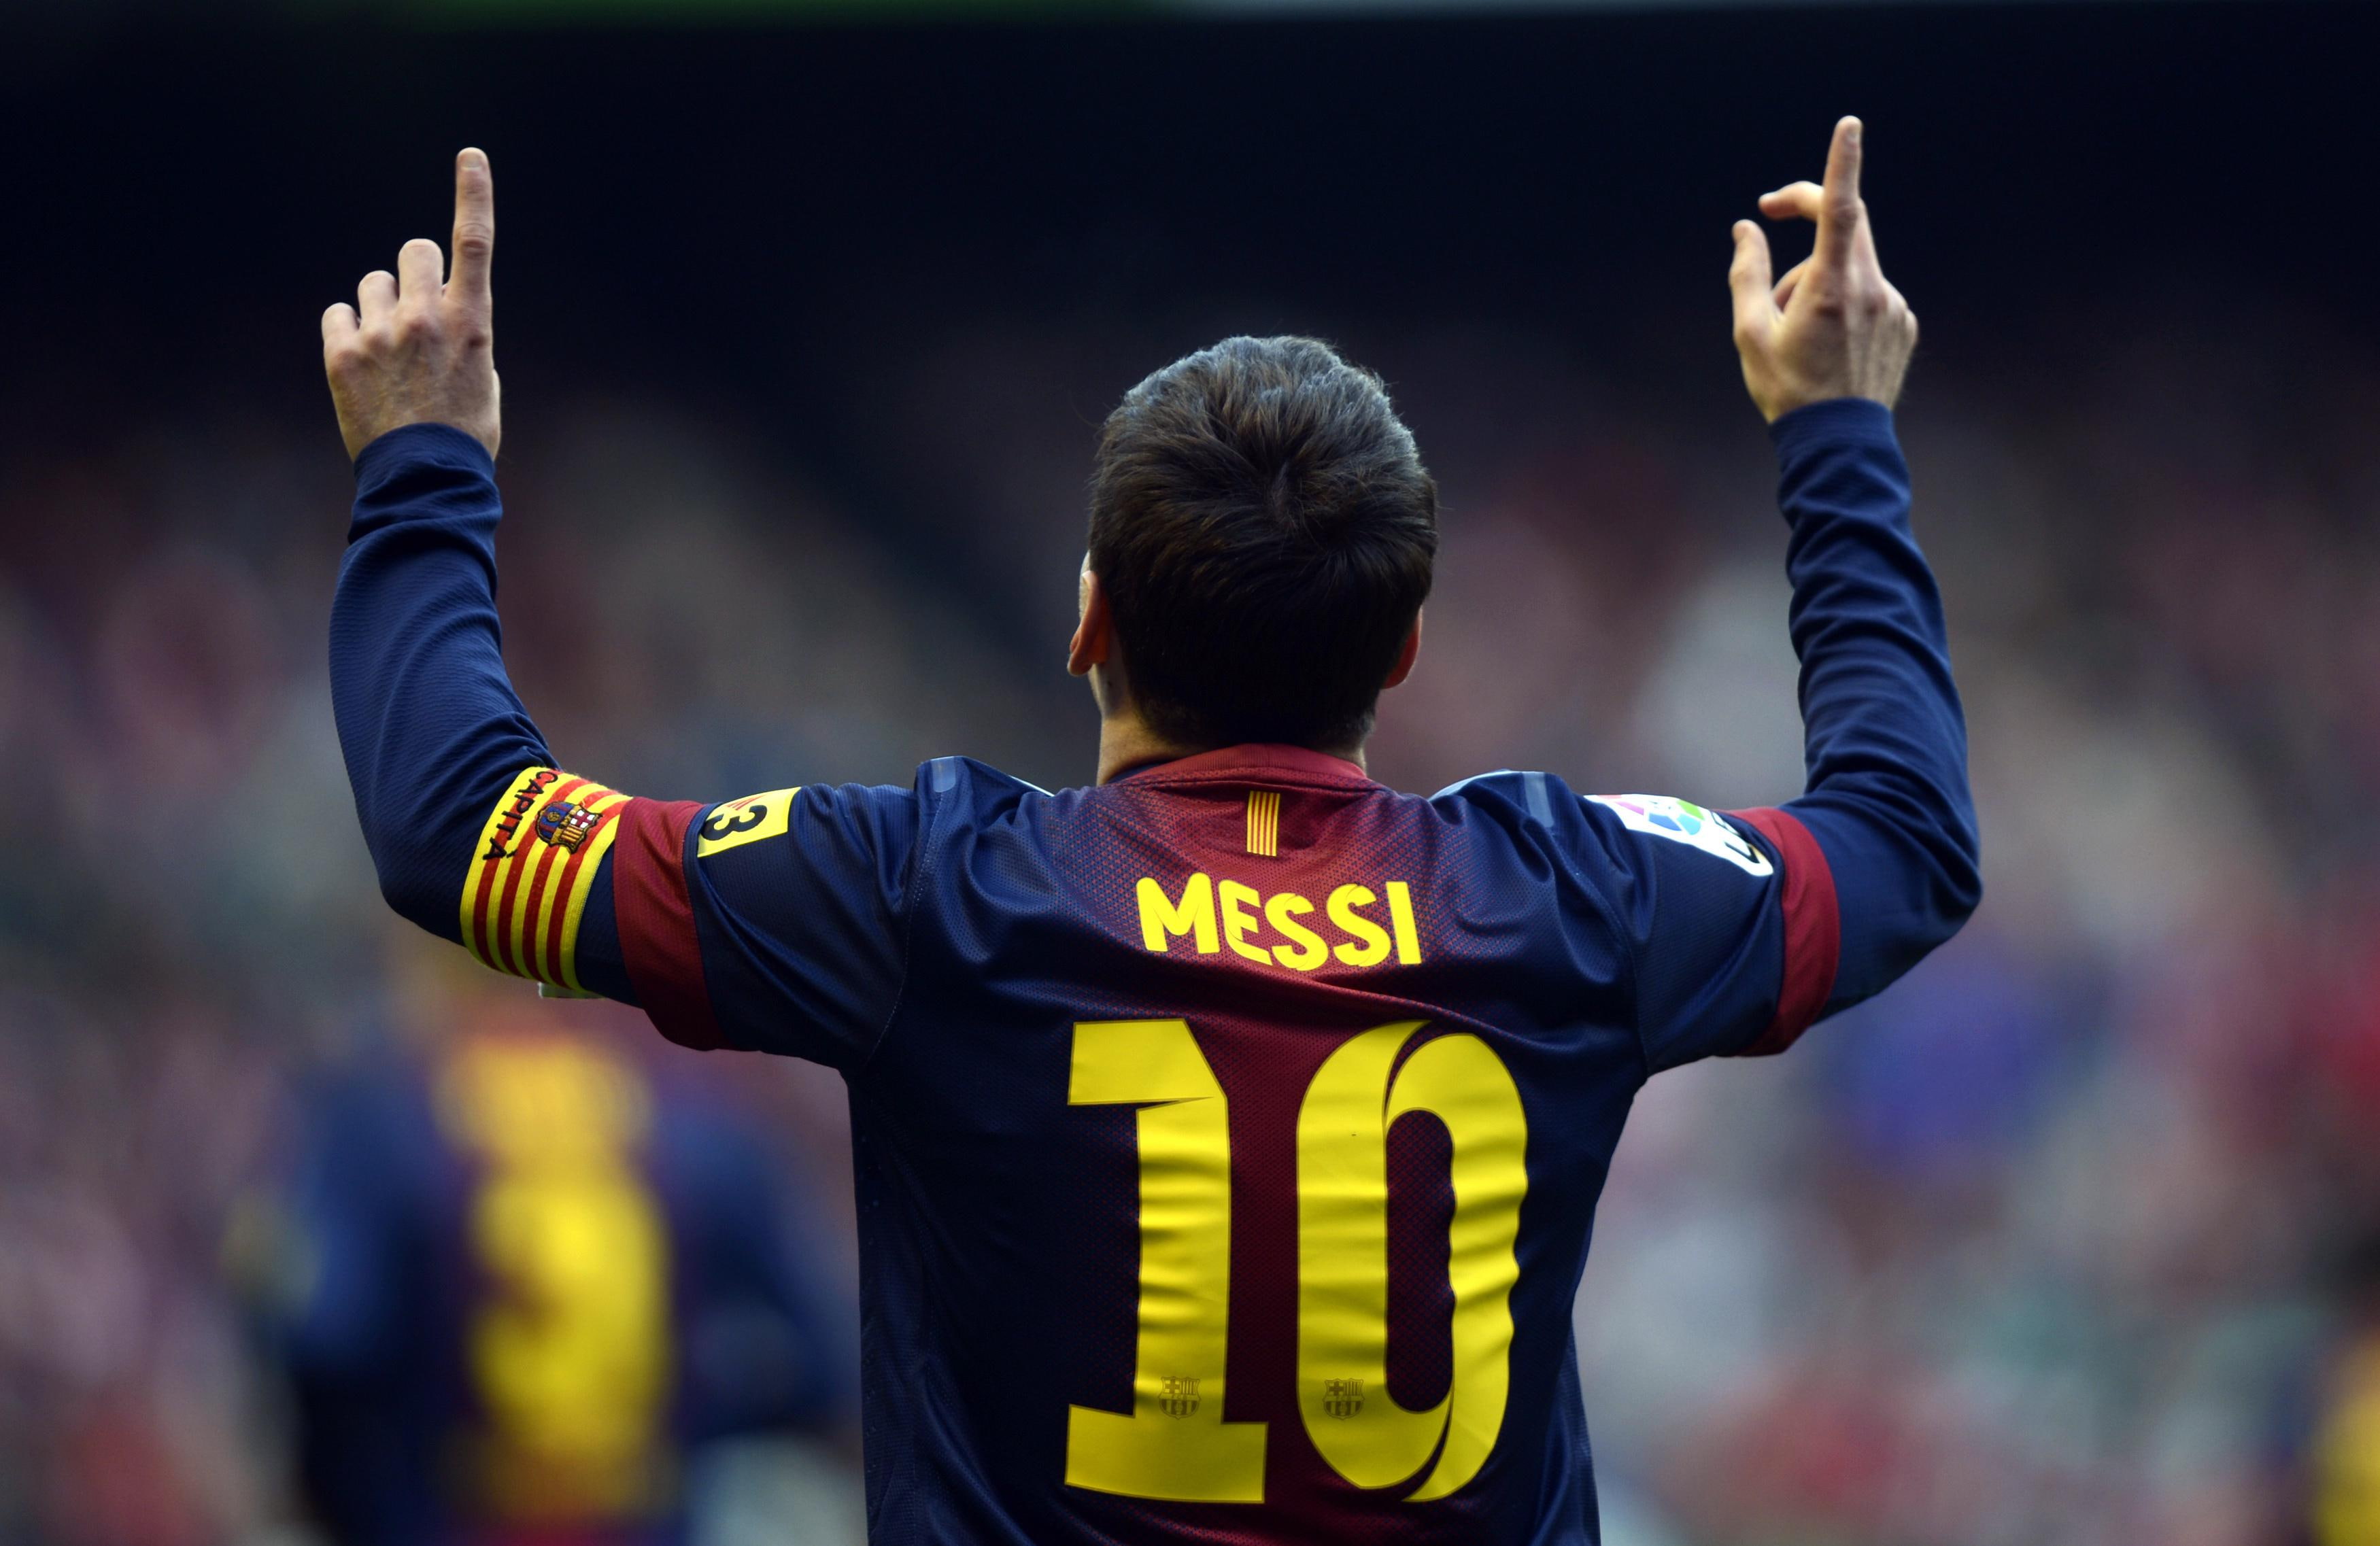 lionel messi, player, back, shirt, messi 10 blue, maroon and yellow soccer jersey